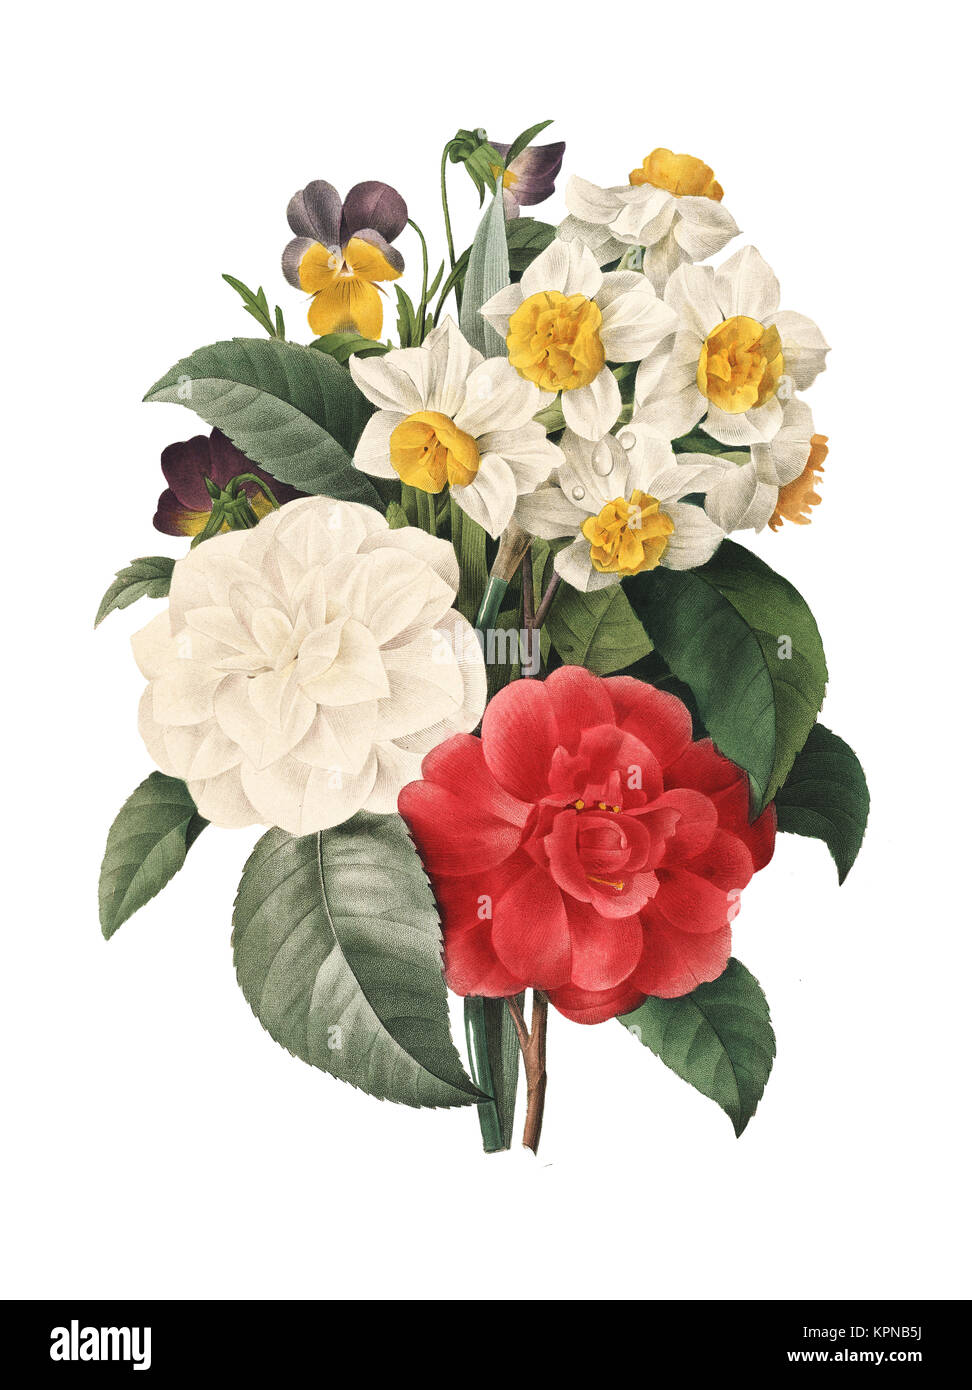 19th-century illustration of a bouquet of camellias daffodils and viollets. Engraving by Pierre-Joseph Redoute. Published in Choix Des Plus Belles Fle Stock Photo